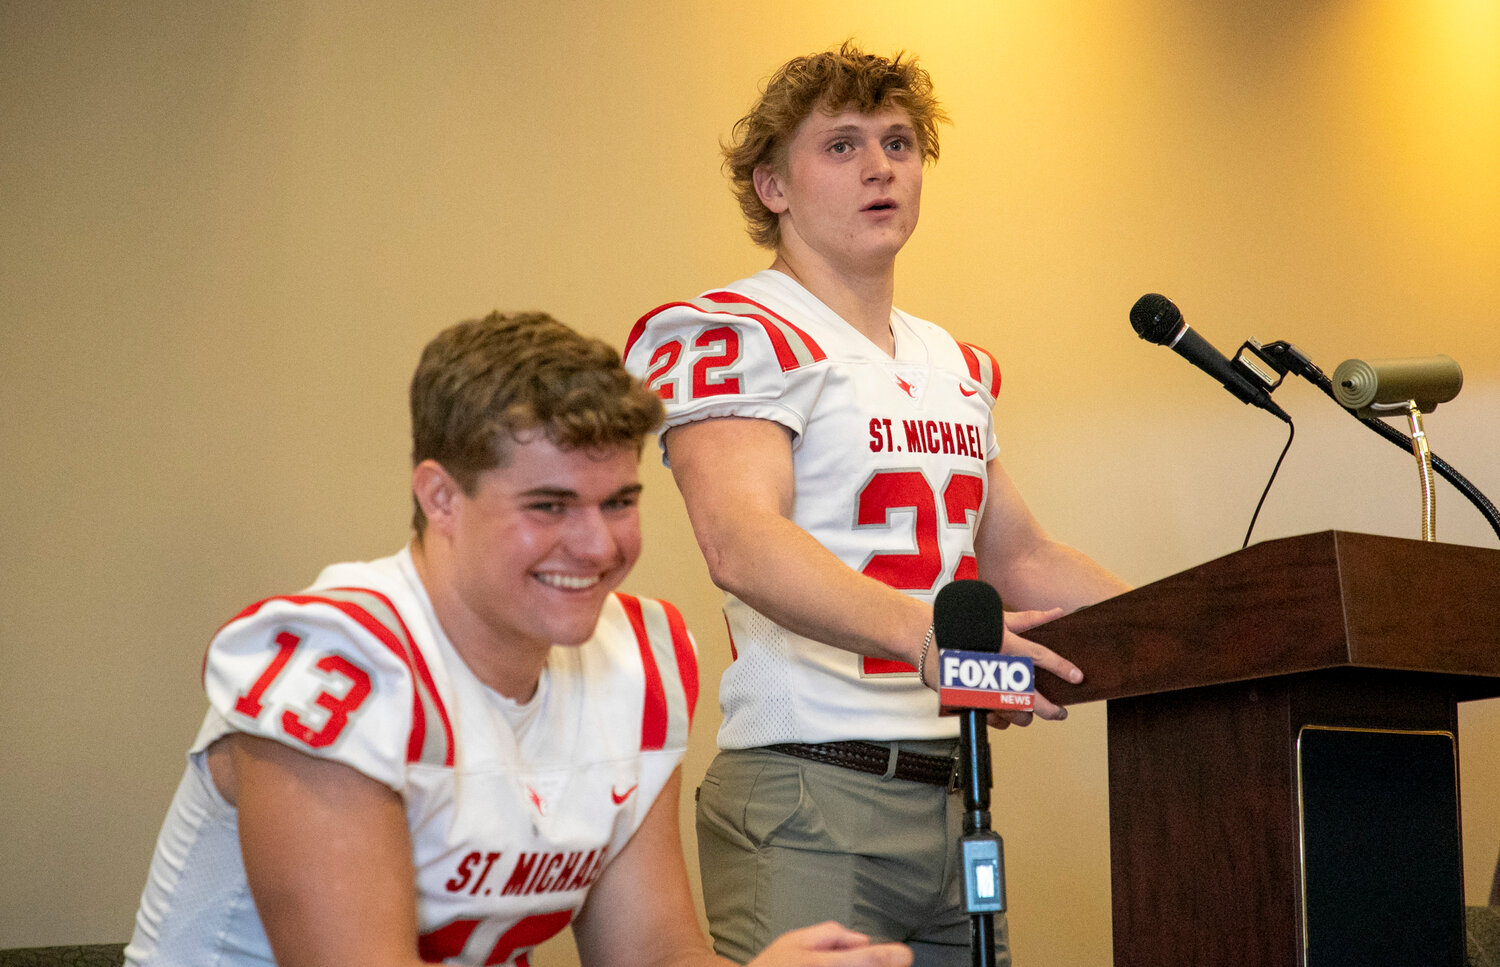 Cardinal seniors Martin Corte (22) and Zach Taylor (13) react to a question at Baldwin County Media Days in Daphne on July 31 where local teams previewed their upcoming seasons. Corte is one of the upperclassmen leaders on a fairly young St. Michael squad this season.